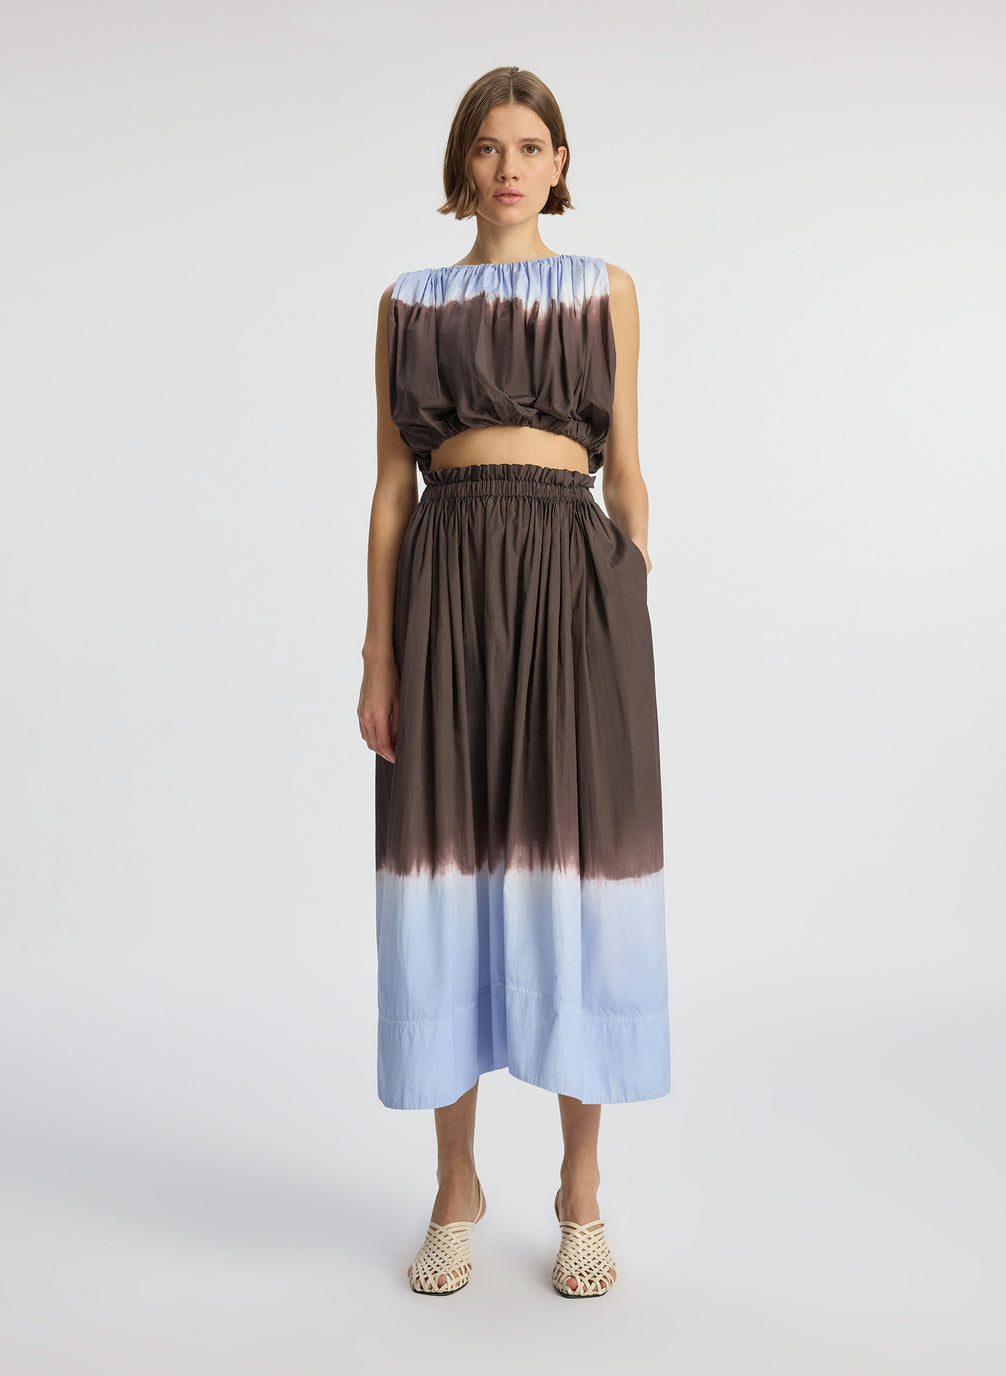 front view of woman wearing brown and light blue dip dye sleeveless top and matching midi skirt